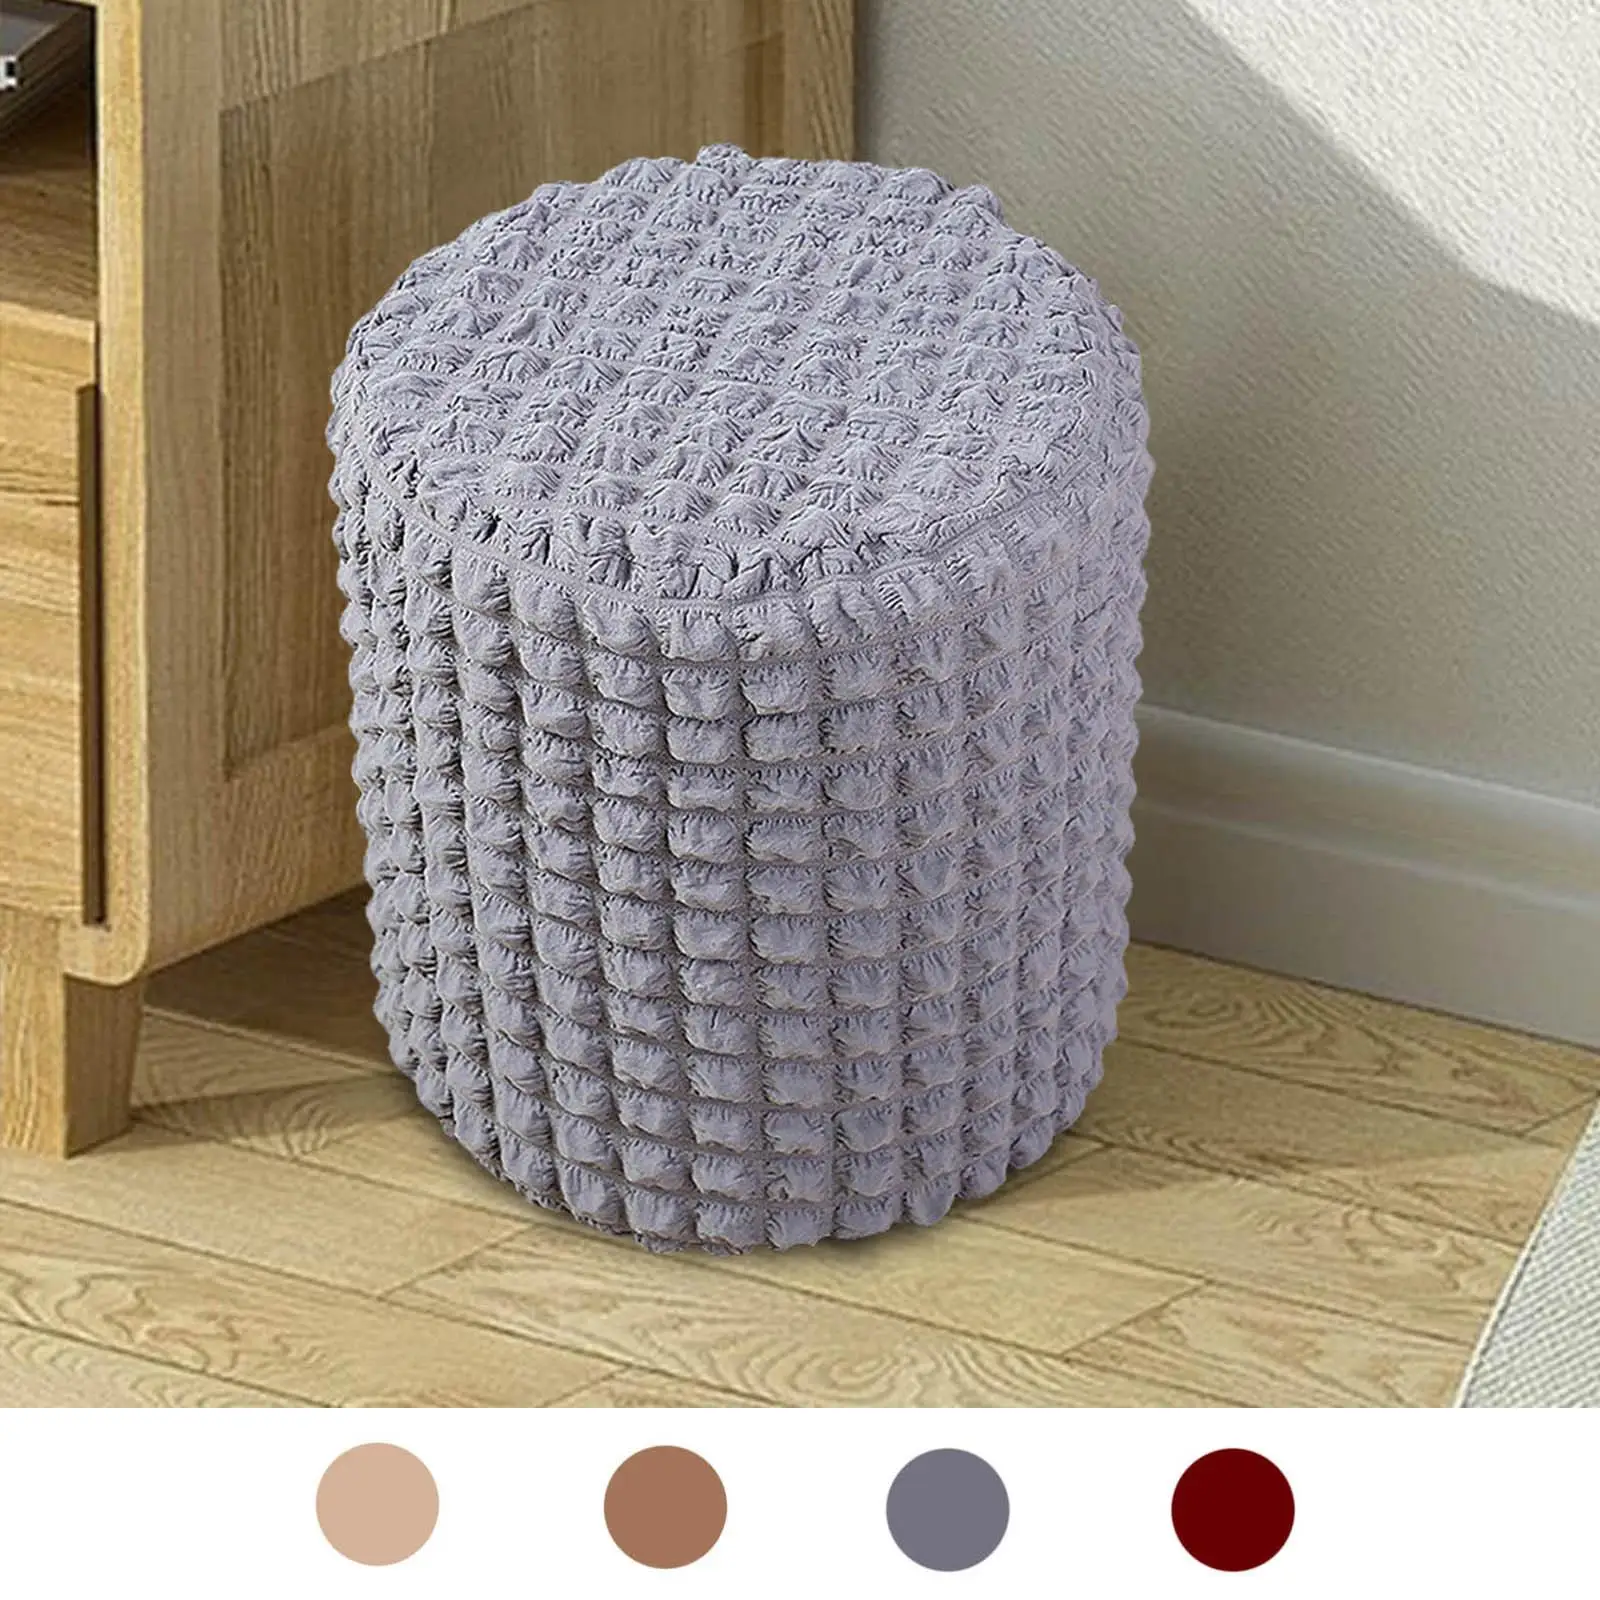 Elastic Ottoman Cover, Ottoman Protector Living Room Furniture Cover Foot Rest